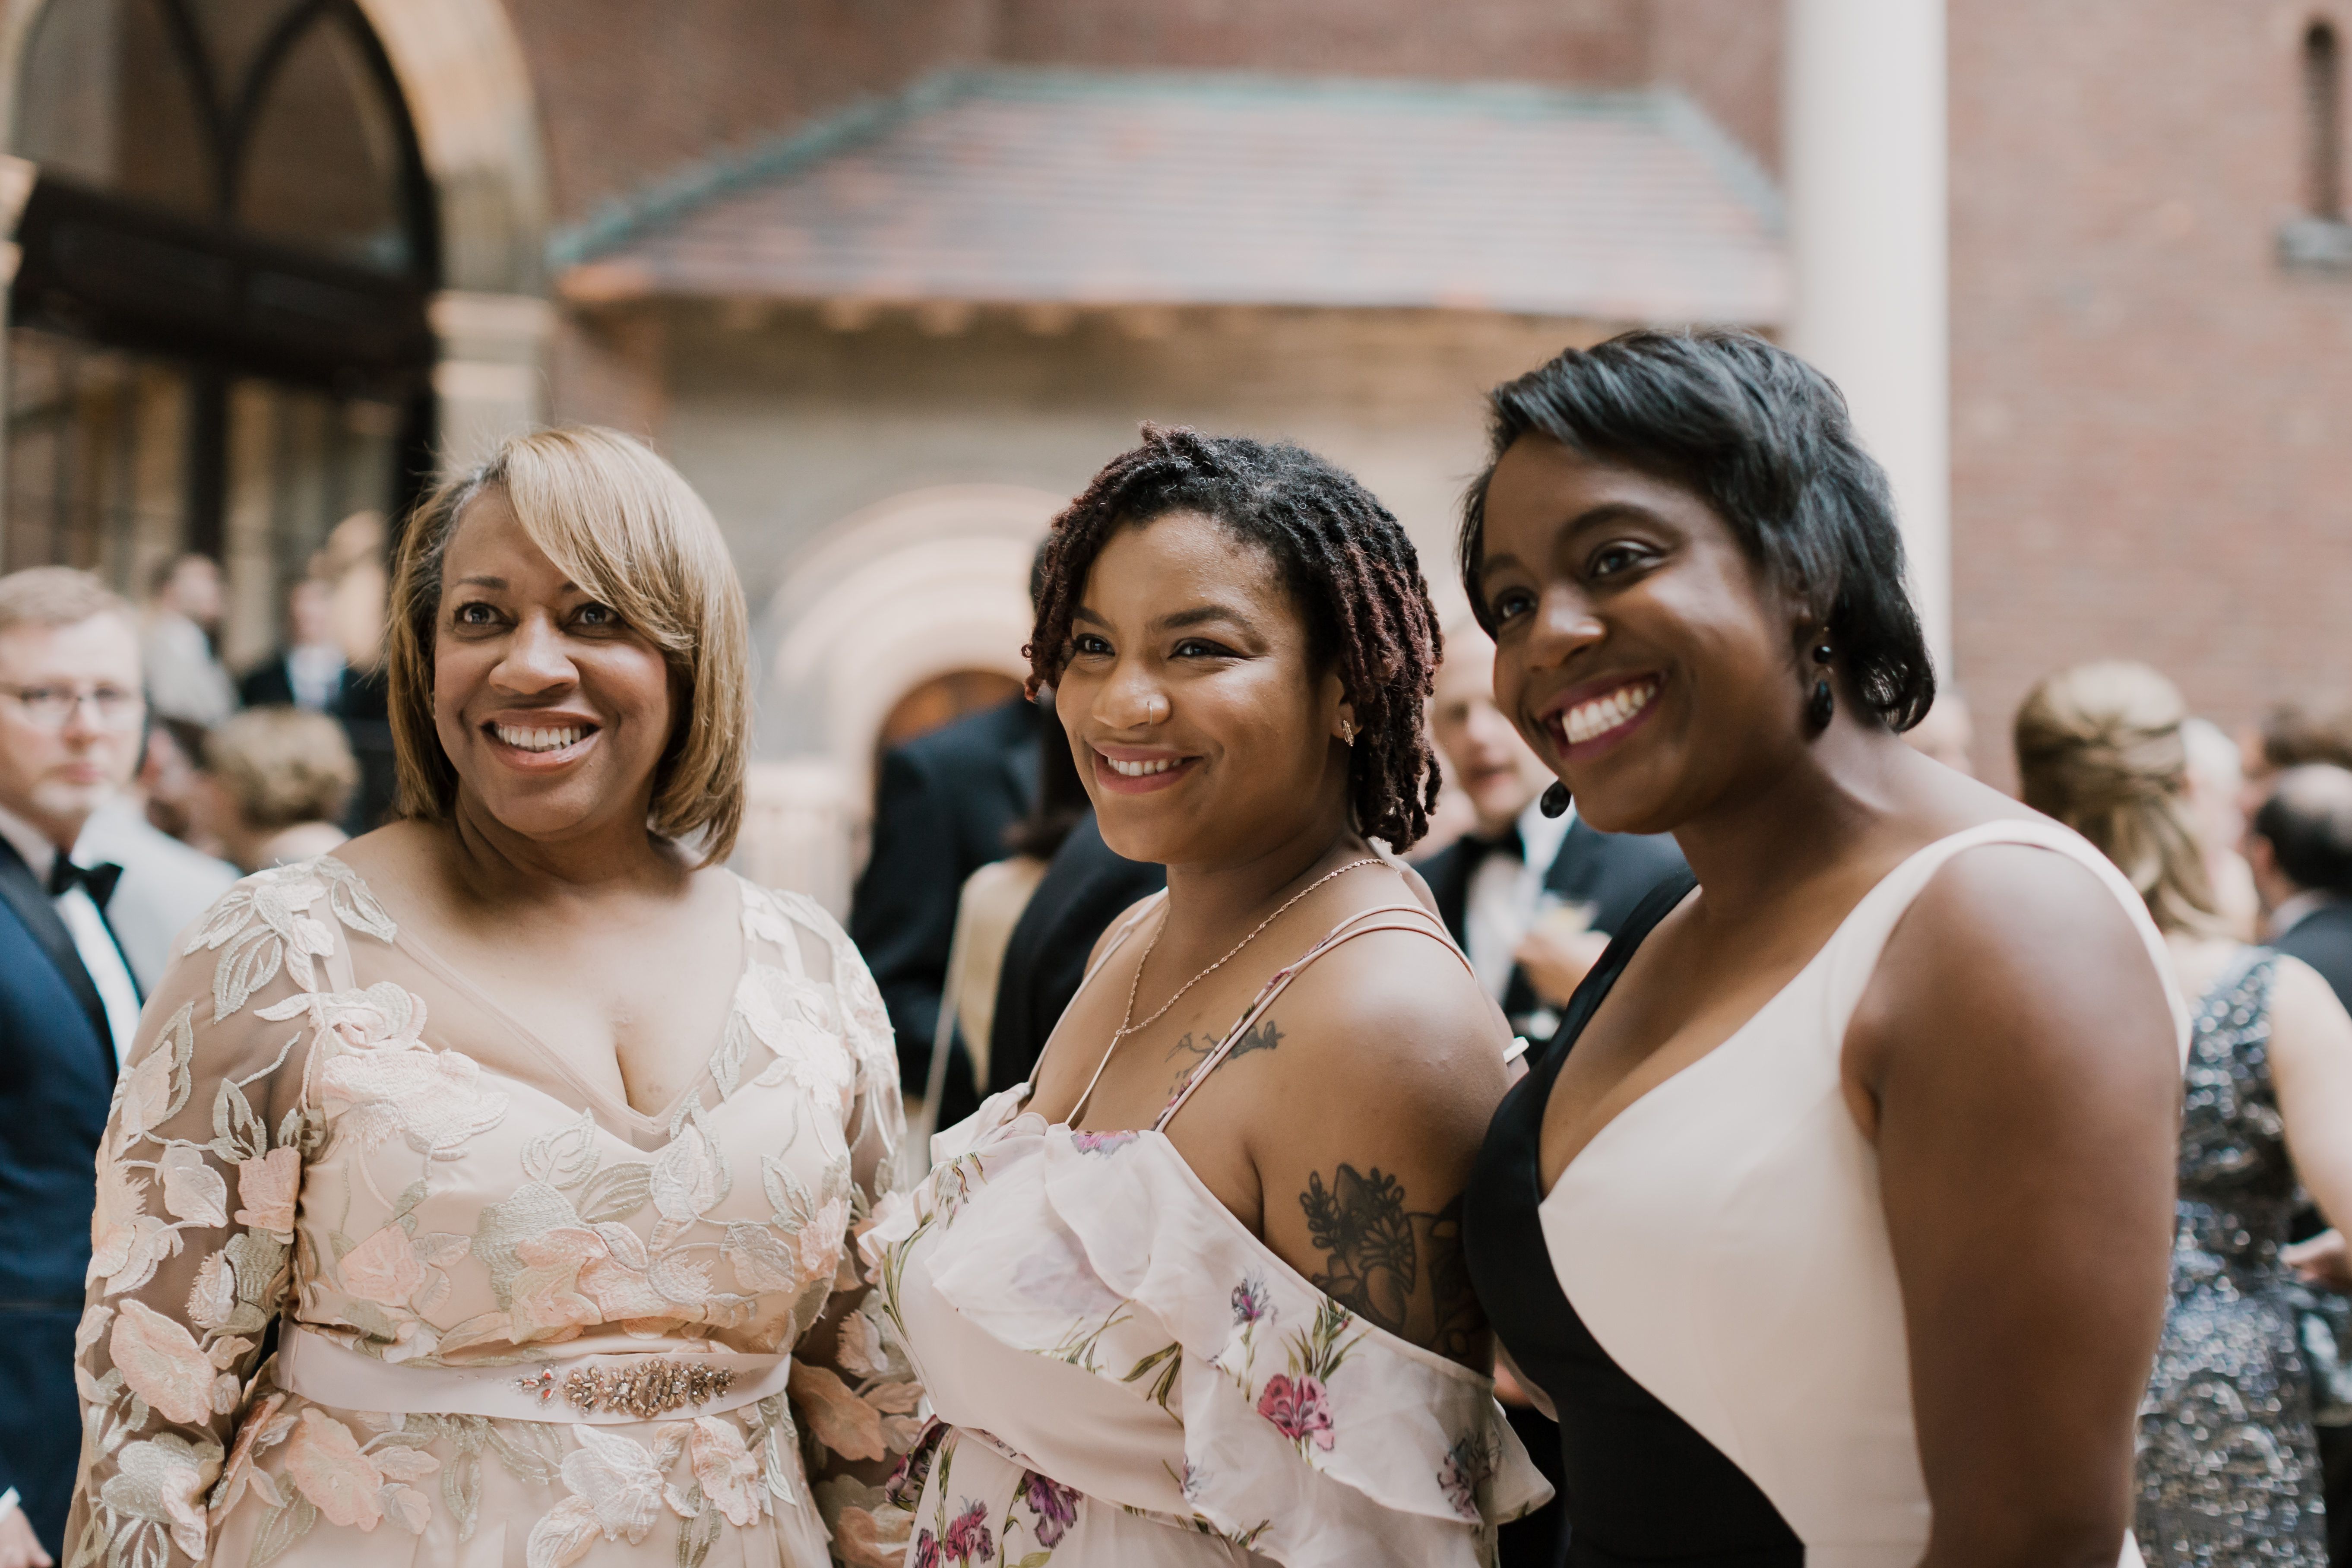 Guests enjoy the Dayton Art Institute's 2019 Art Ball. CONTRIBUTED